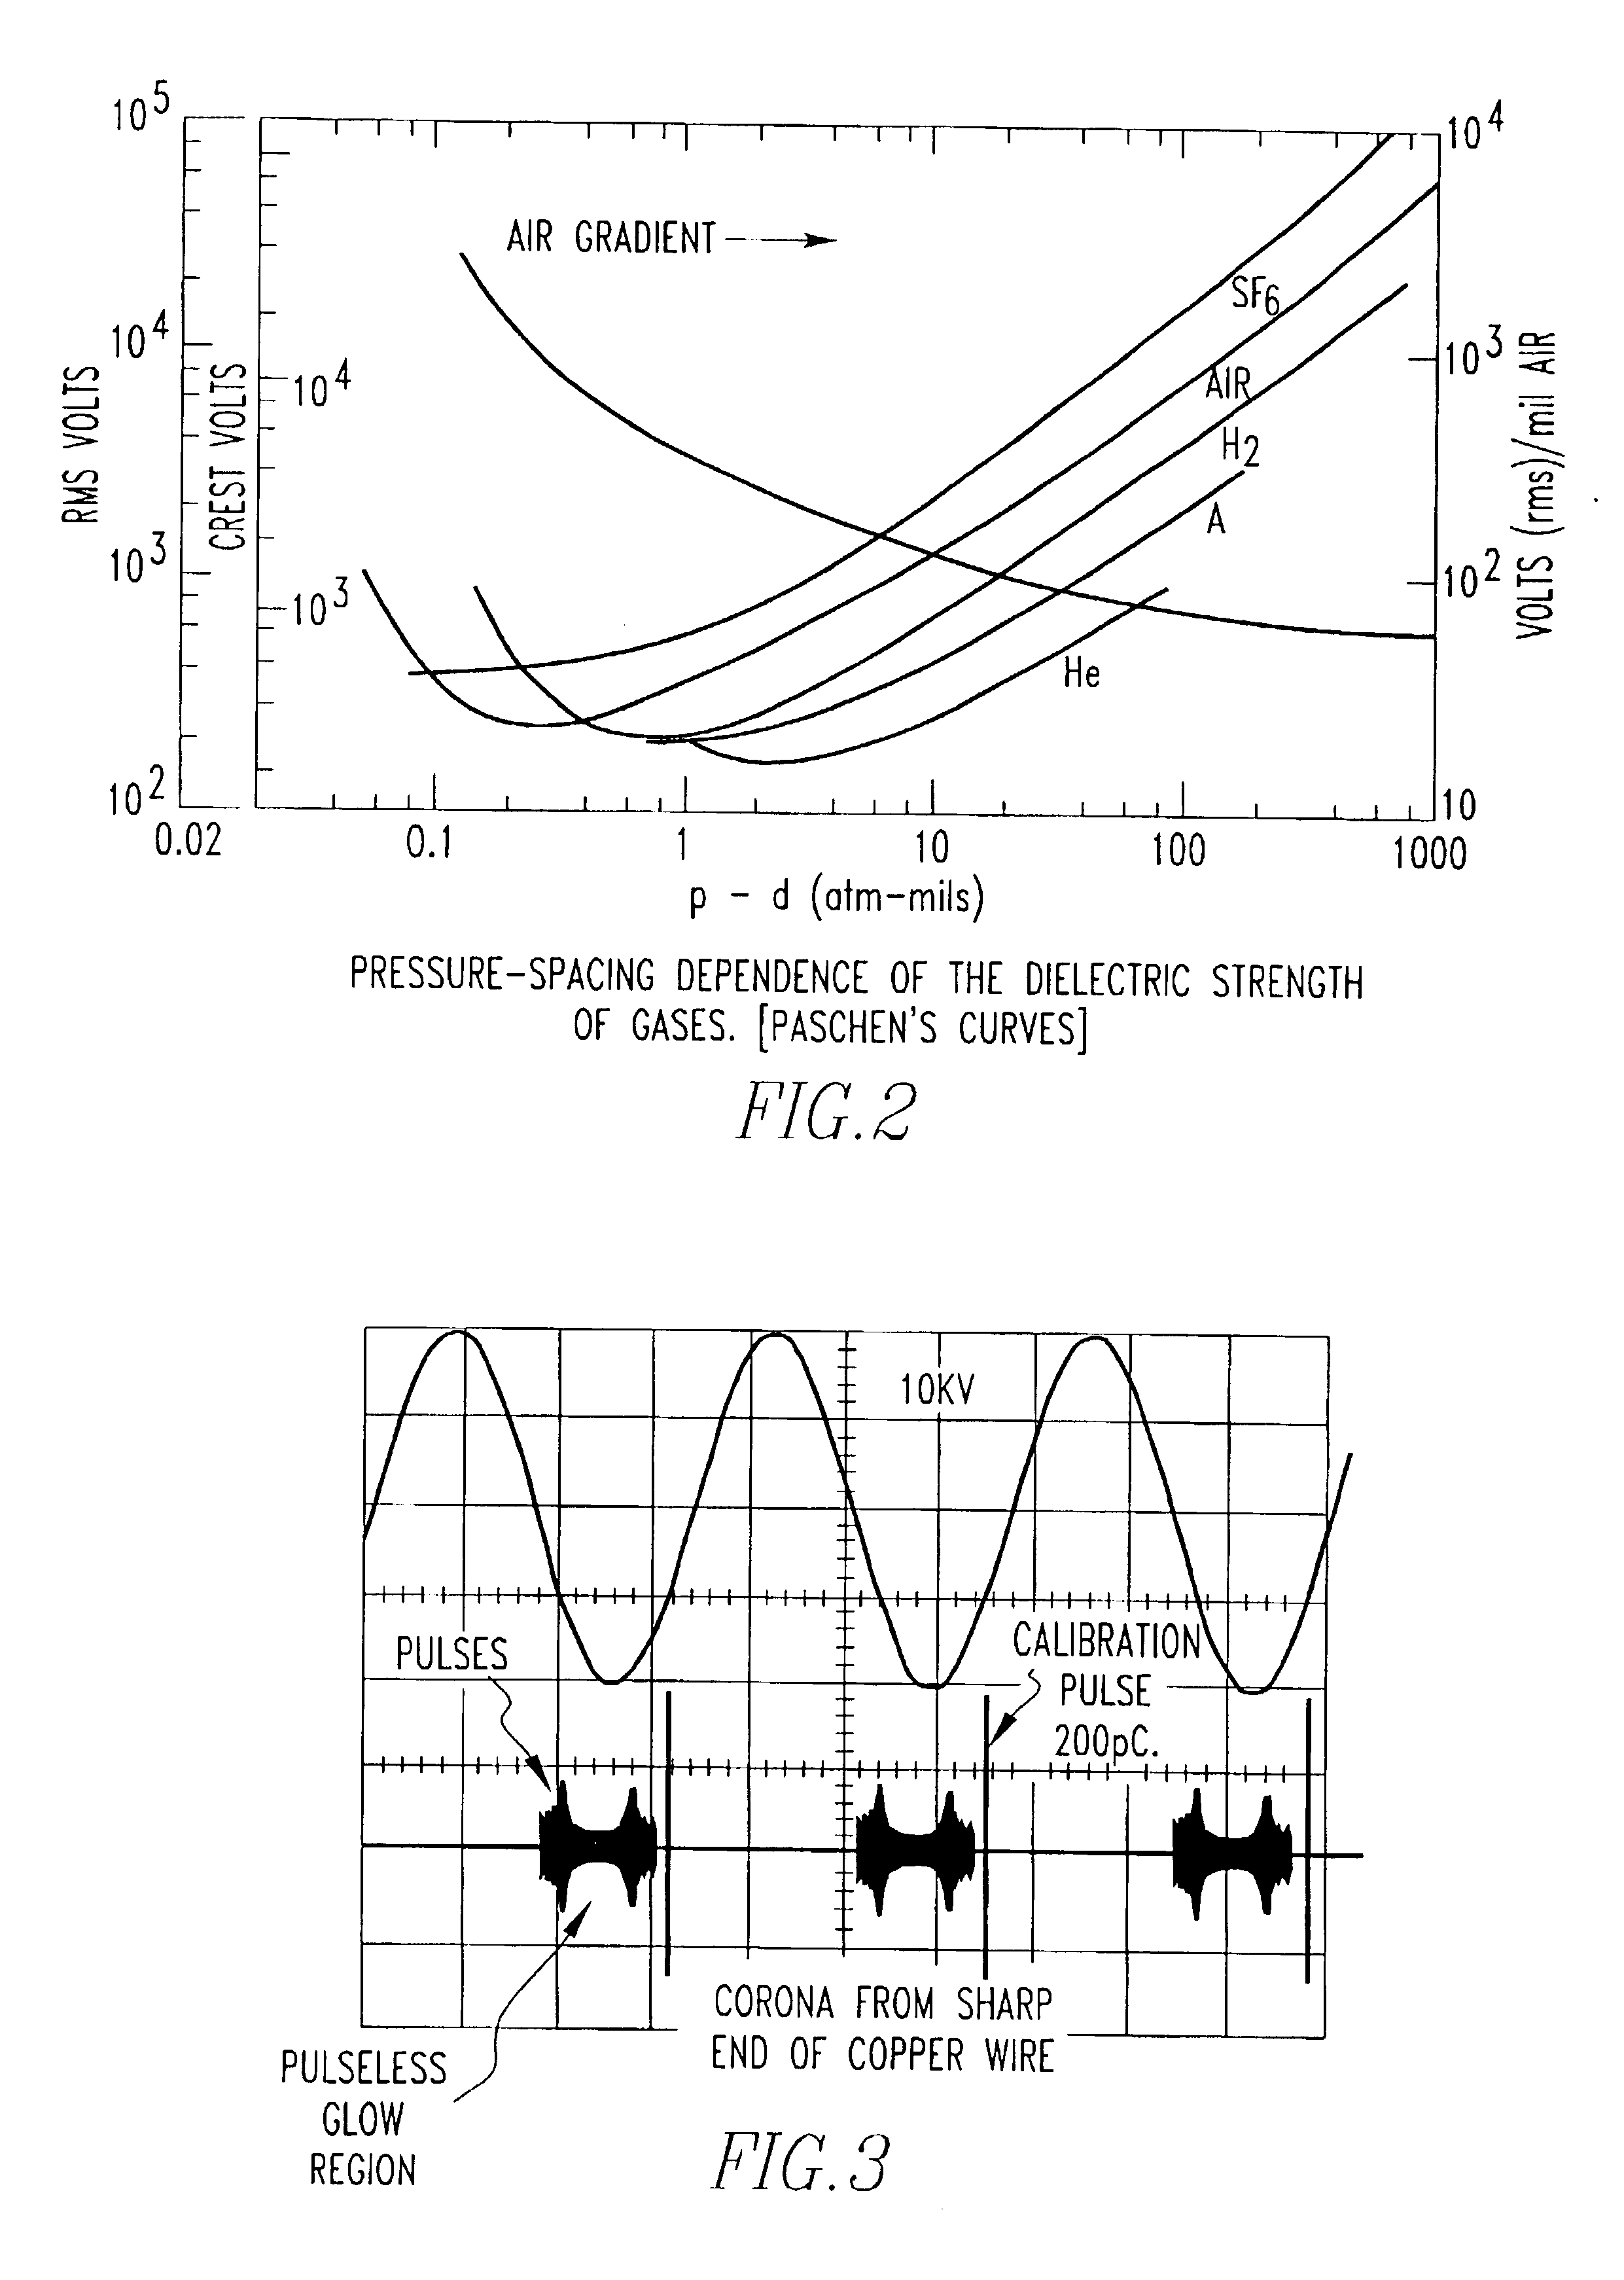 Ultraviolet sensing of the condition of the vanes and blades of gas turbines in service